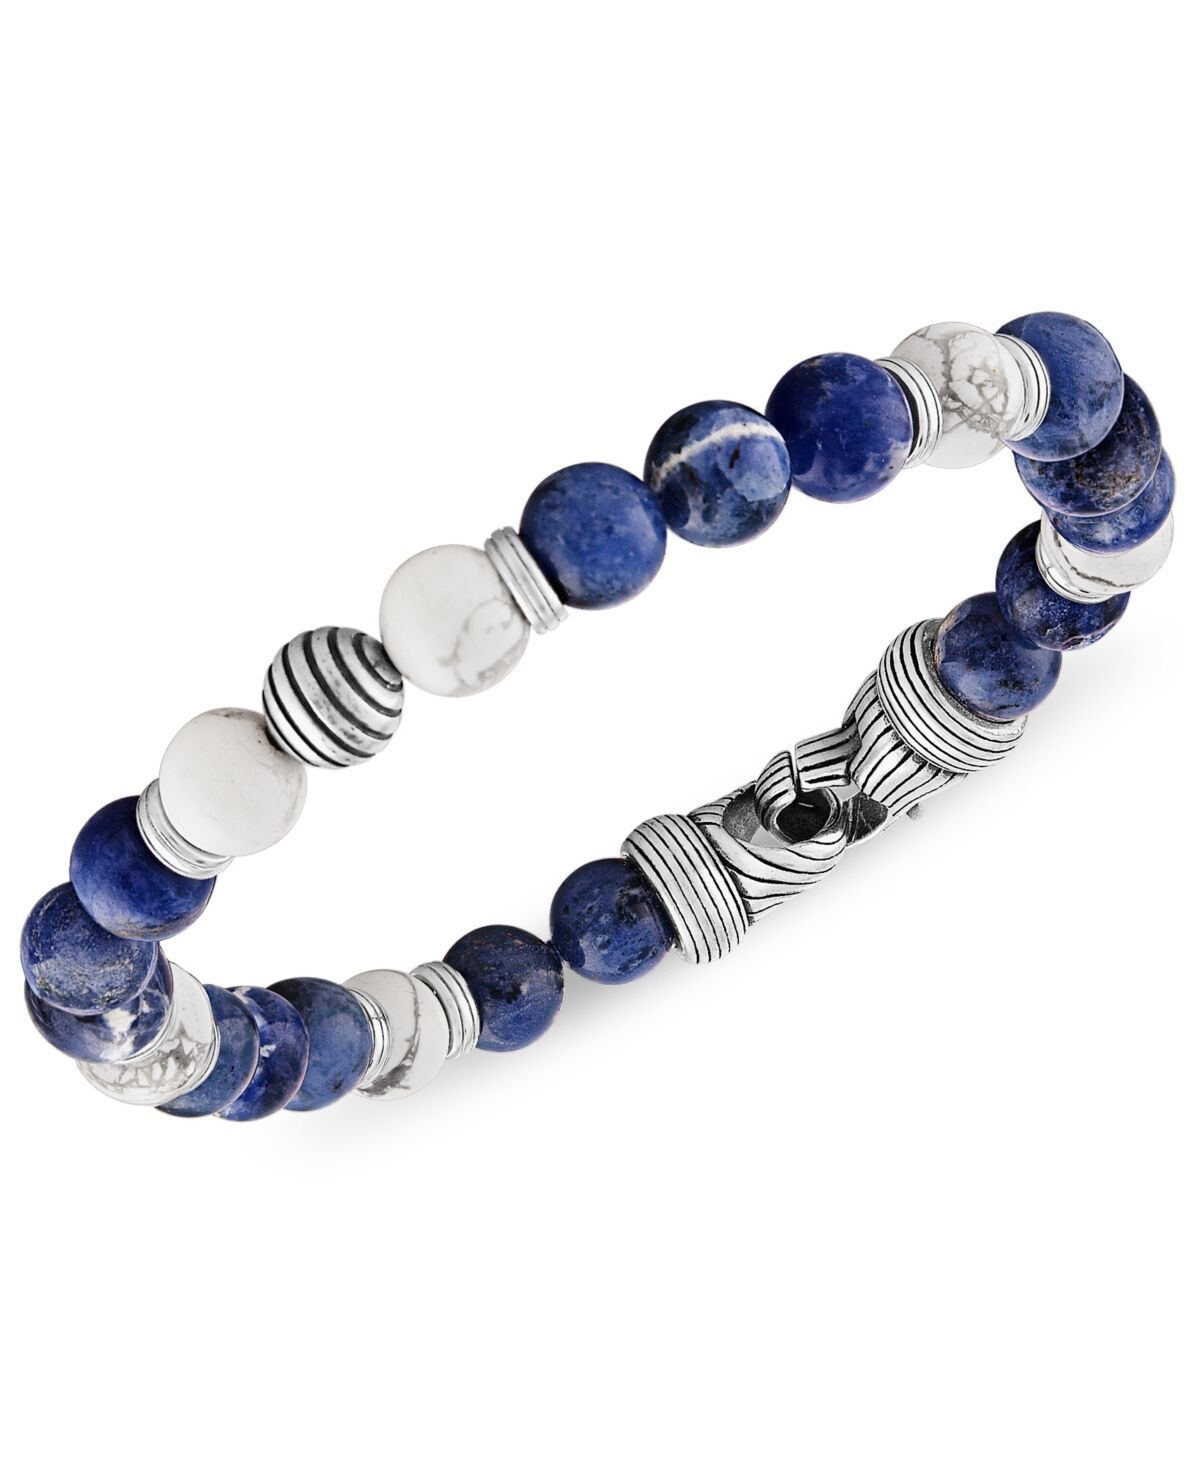 Esquire Men's Jewelry Sodalite & Howlite Bead Bracelet in Sterling Silver, Created for Macy's - Sterling Silver